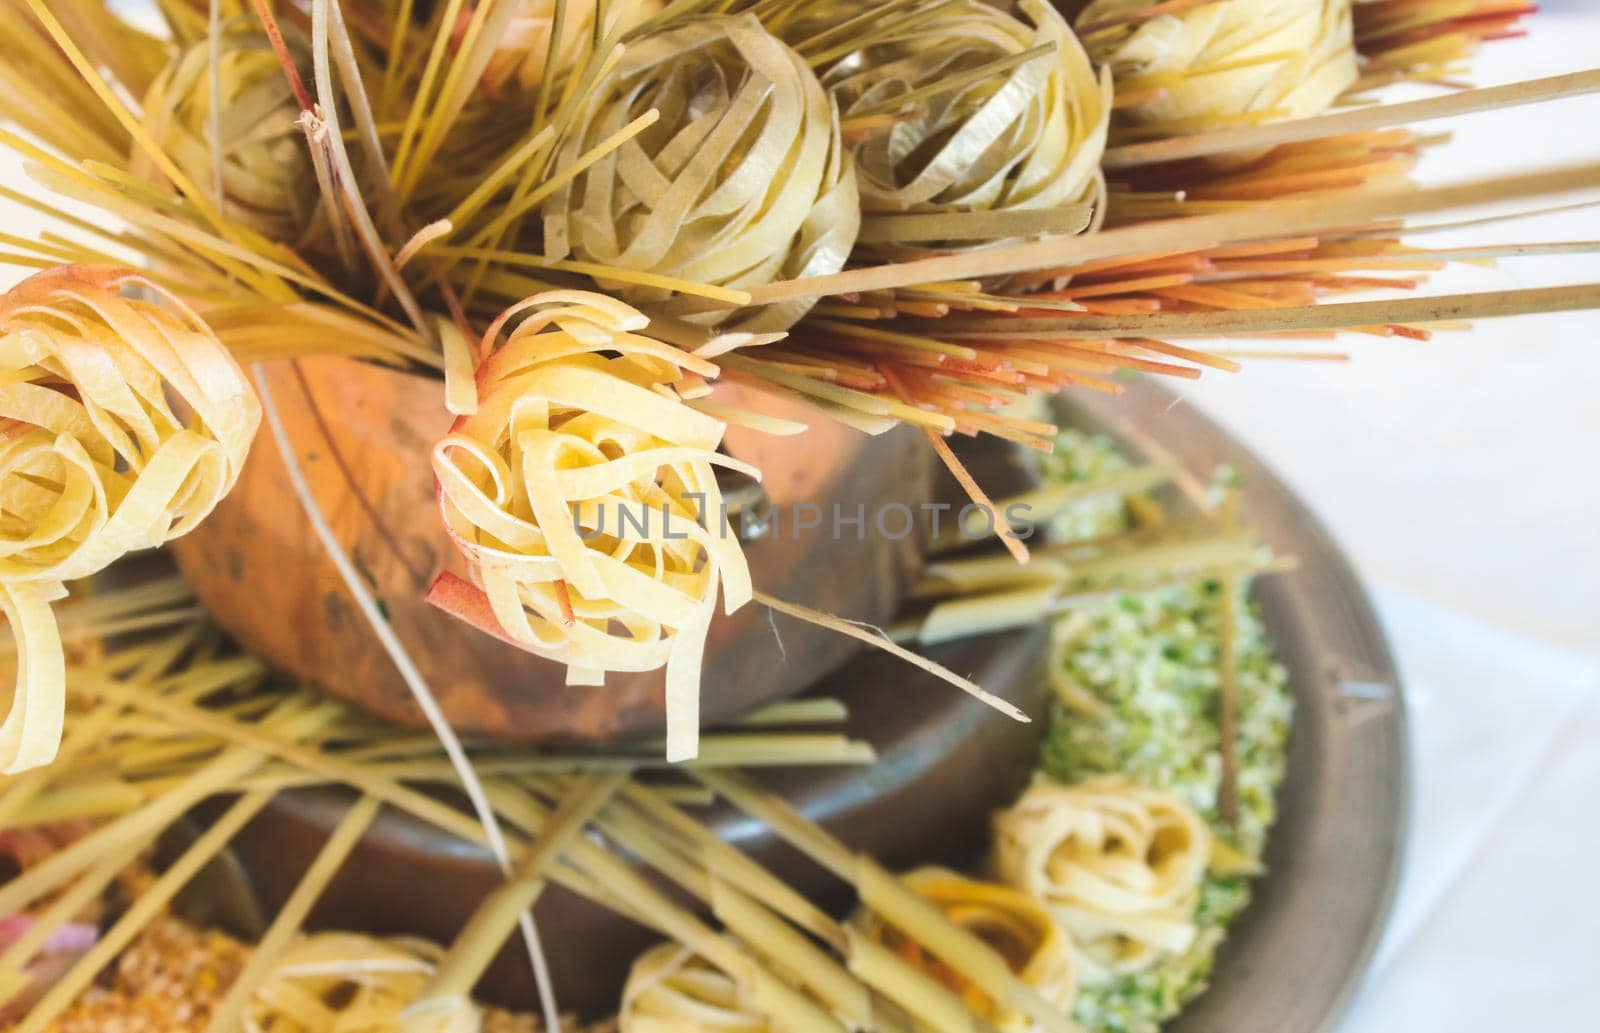 Arrangement of various types of pasta on display against a white background